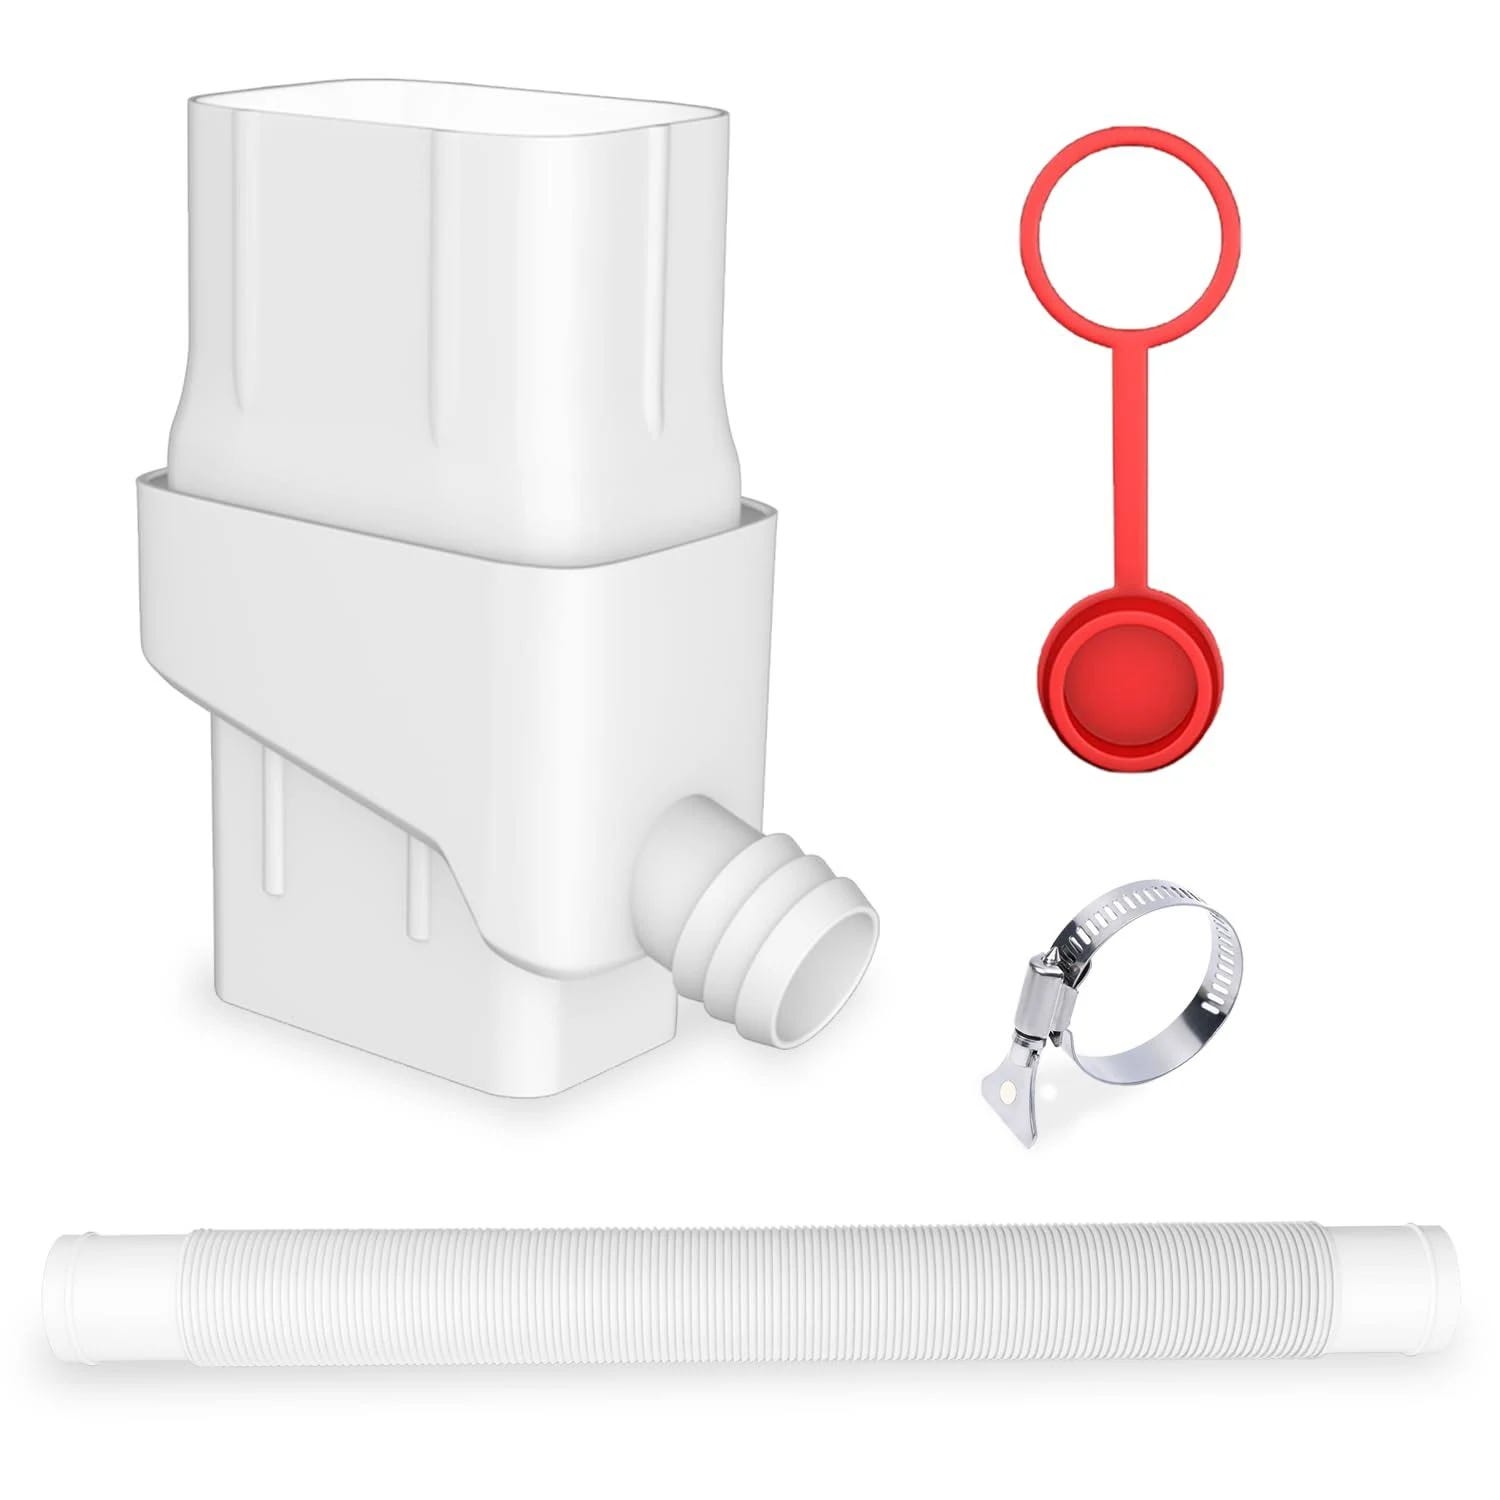 Rainwater Collection System with Adjustable Diverter for Downspouts | Image